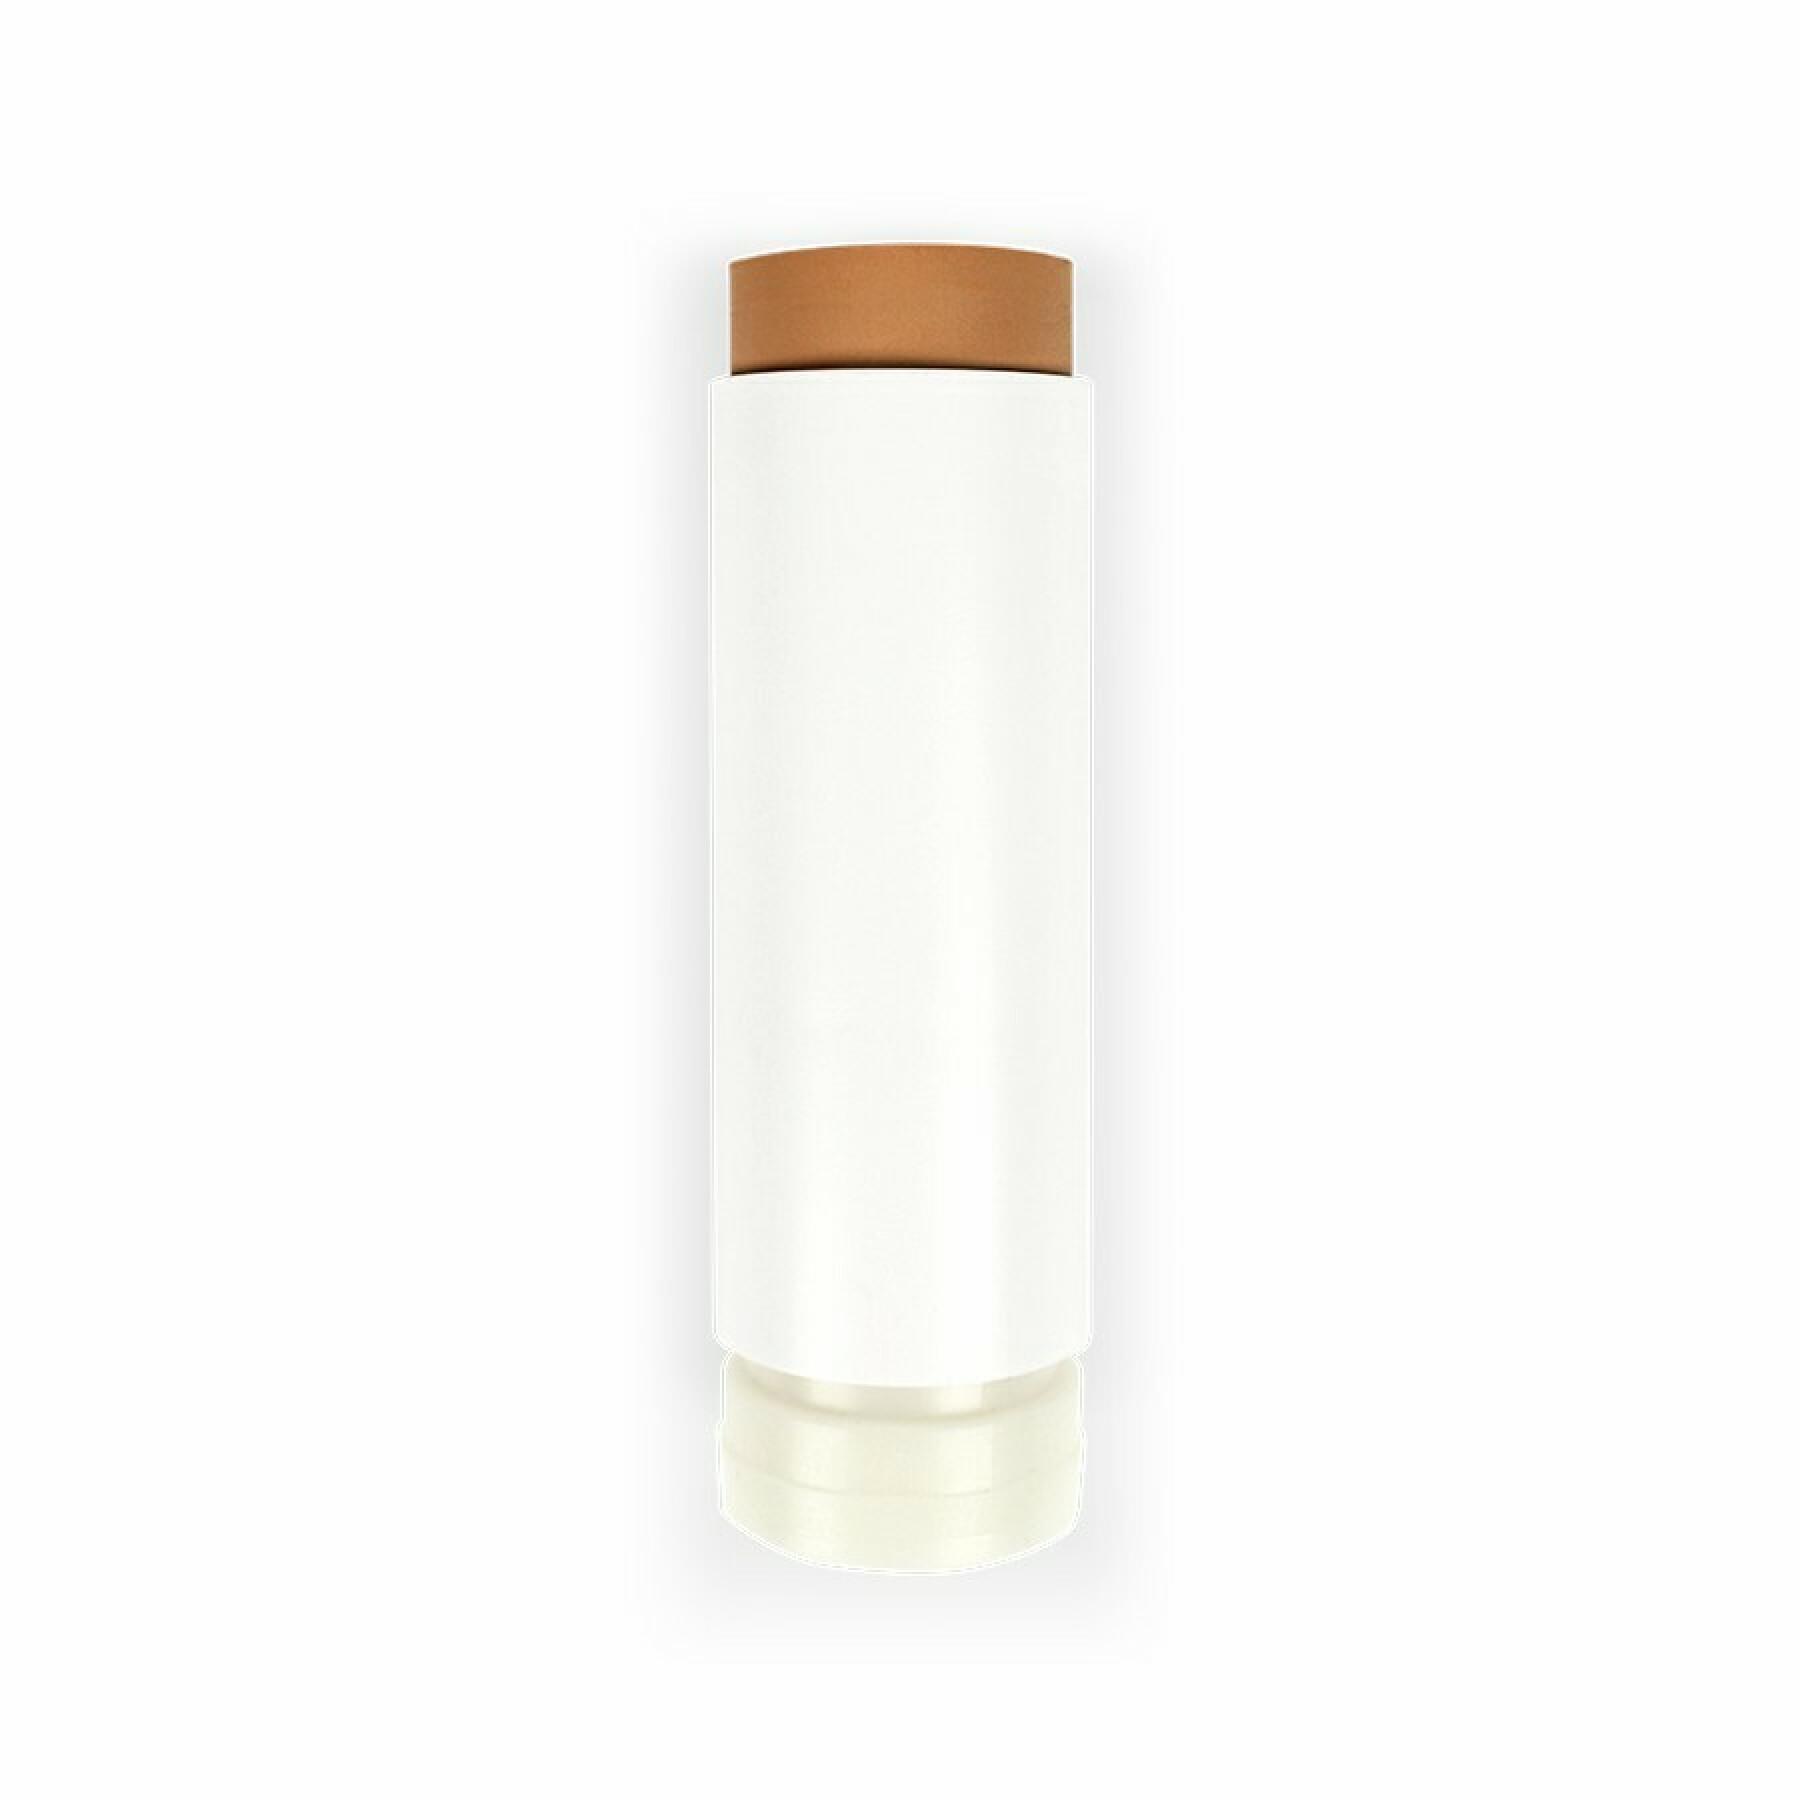 Refill for foundation stick 779 tan camel woman Zao